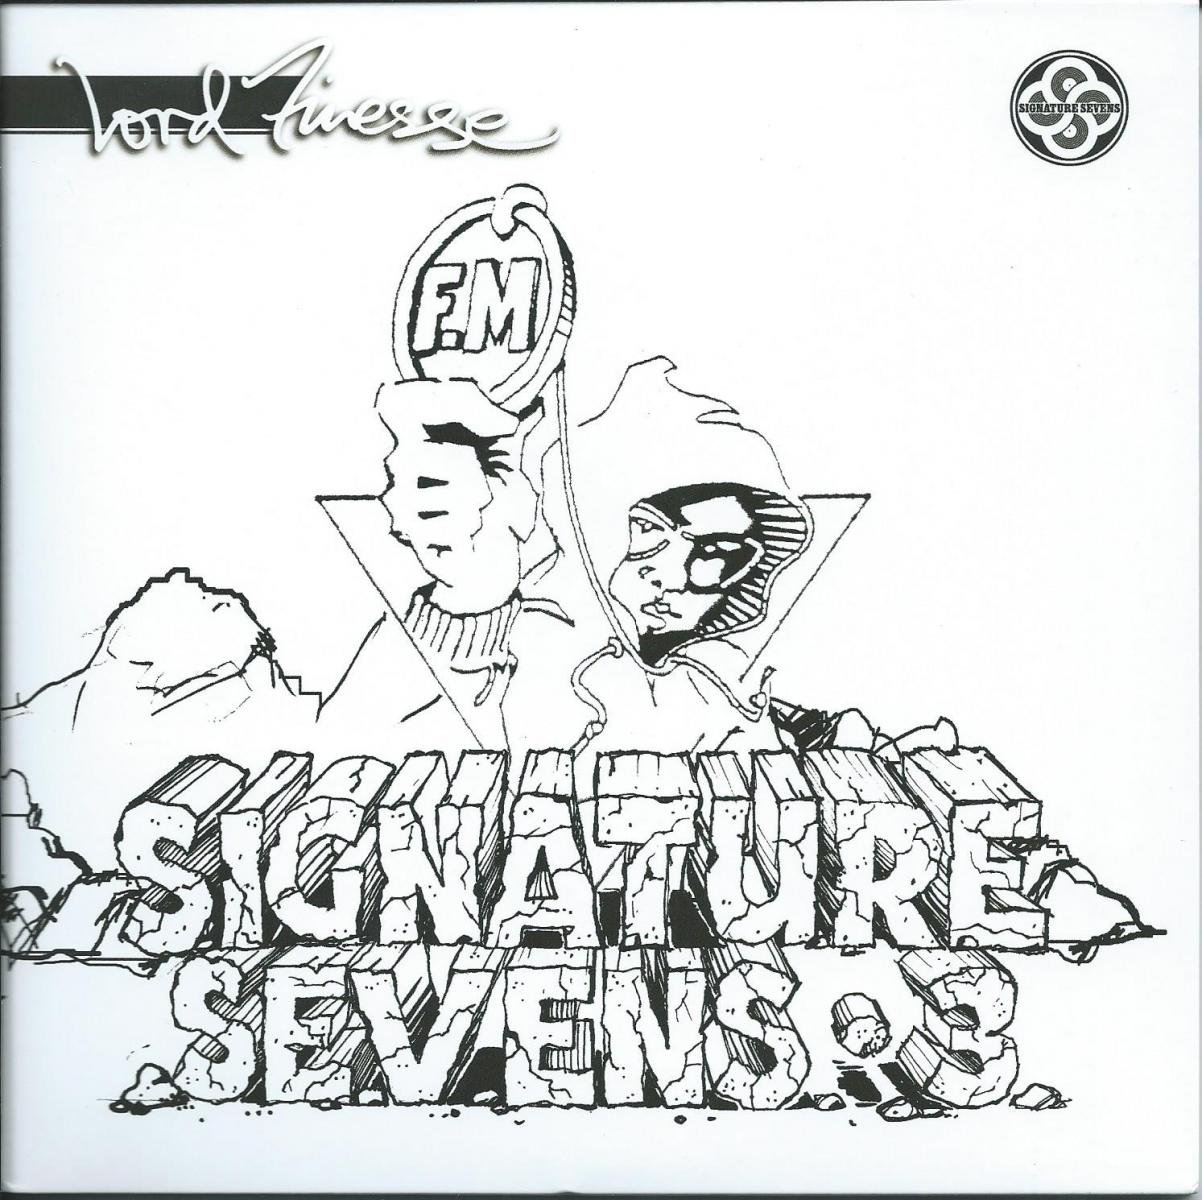 LORD FINESSE / PULL YA CARD / CHECK ME OUT BABY PAH (SIGNATURE SEVENS VOL3)(27